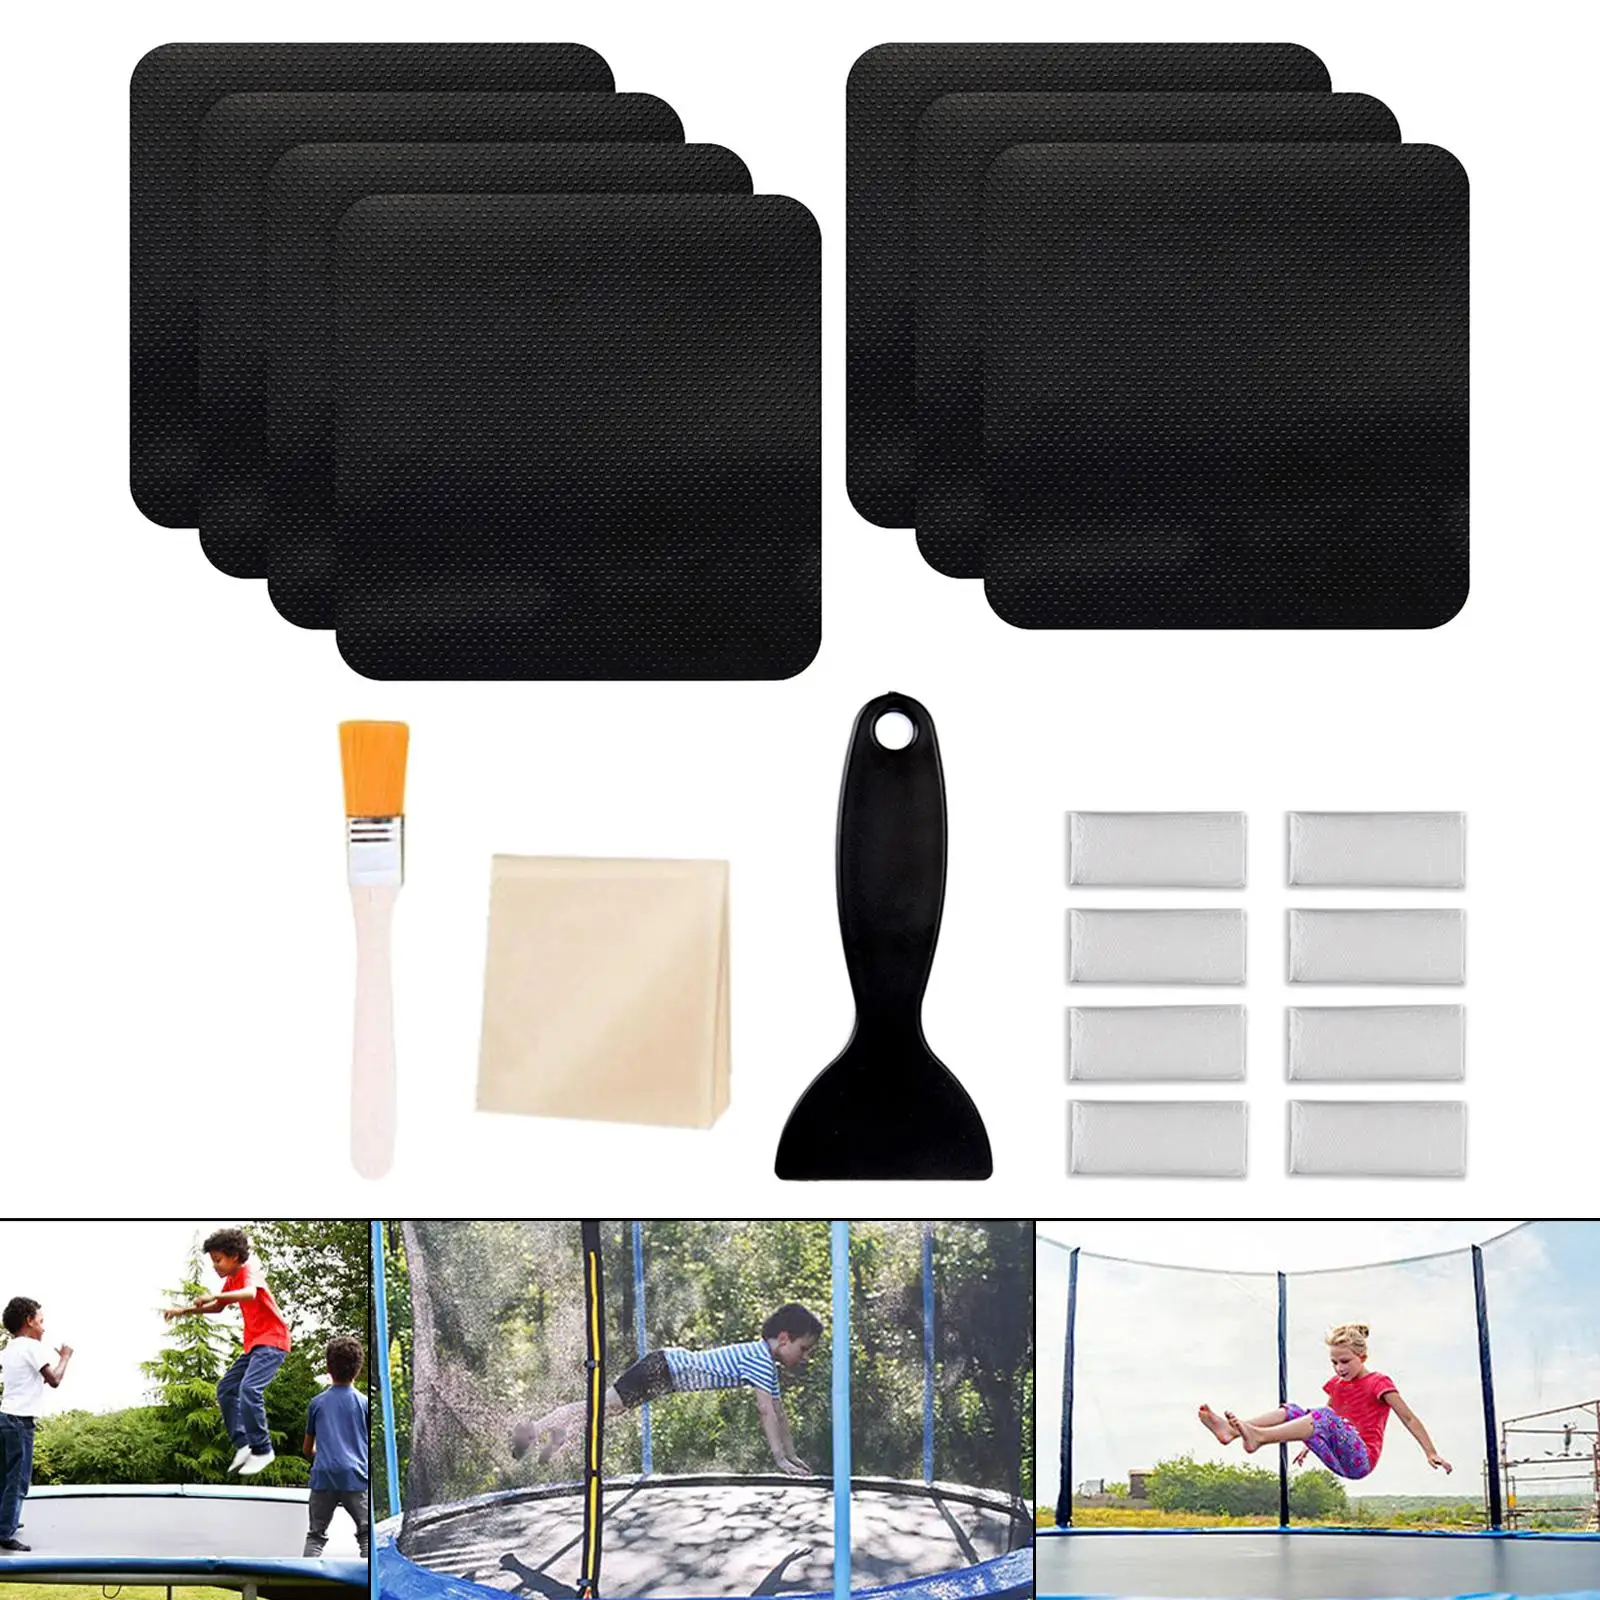 Trampoline Repair Patches 4 x 4 Sports Accessories Waterproof Fixing Pad Net Repair for Tent Trampoline Trampoline Mat Patches